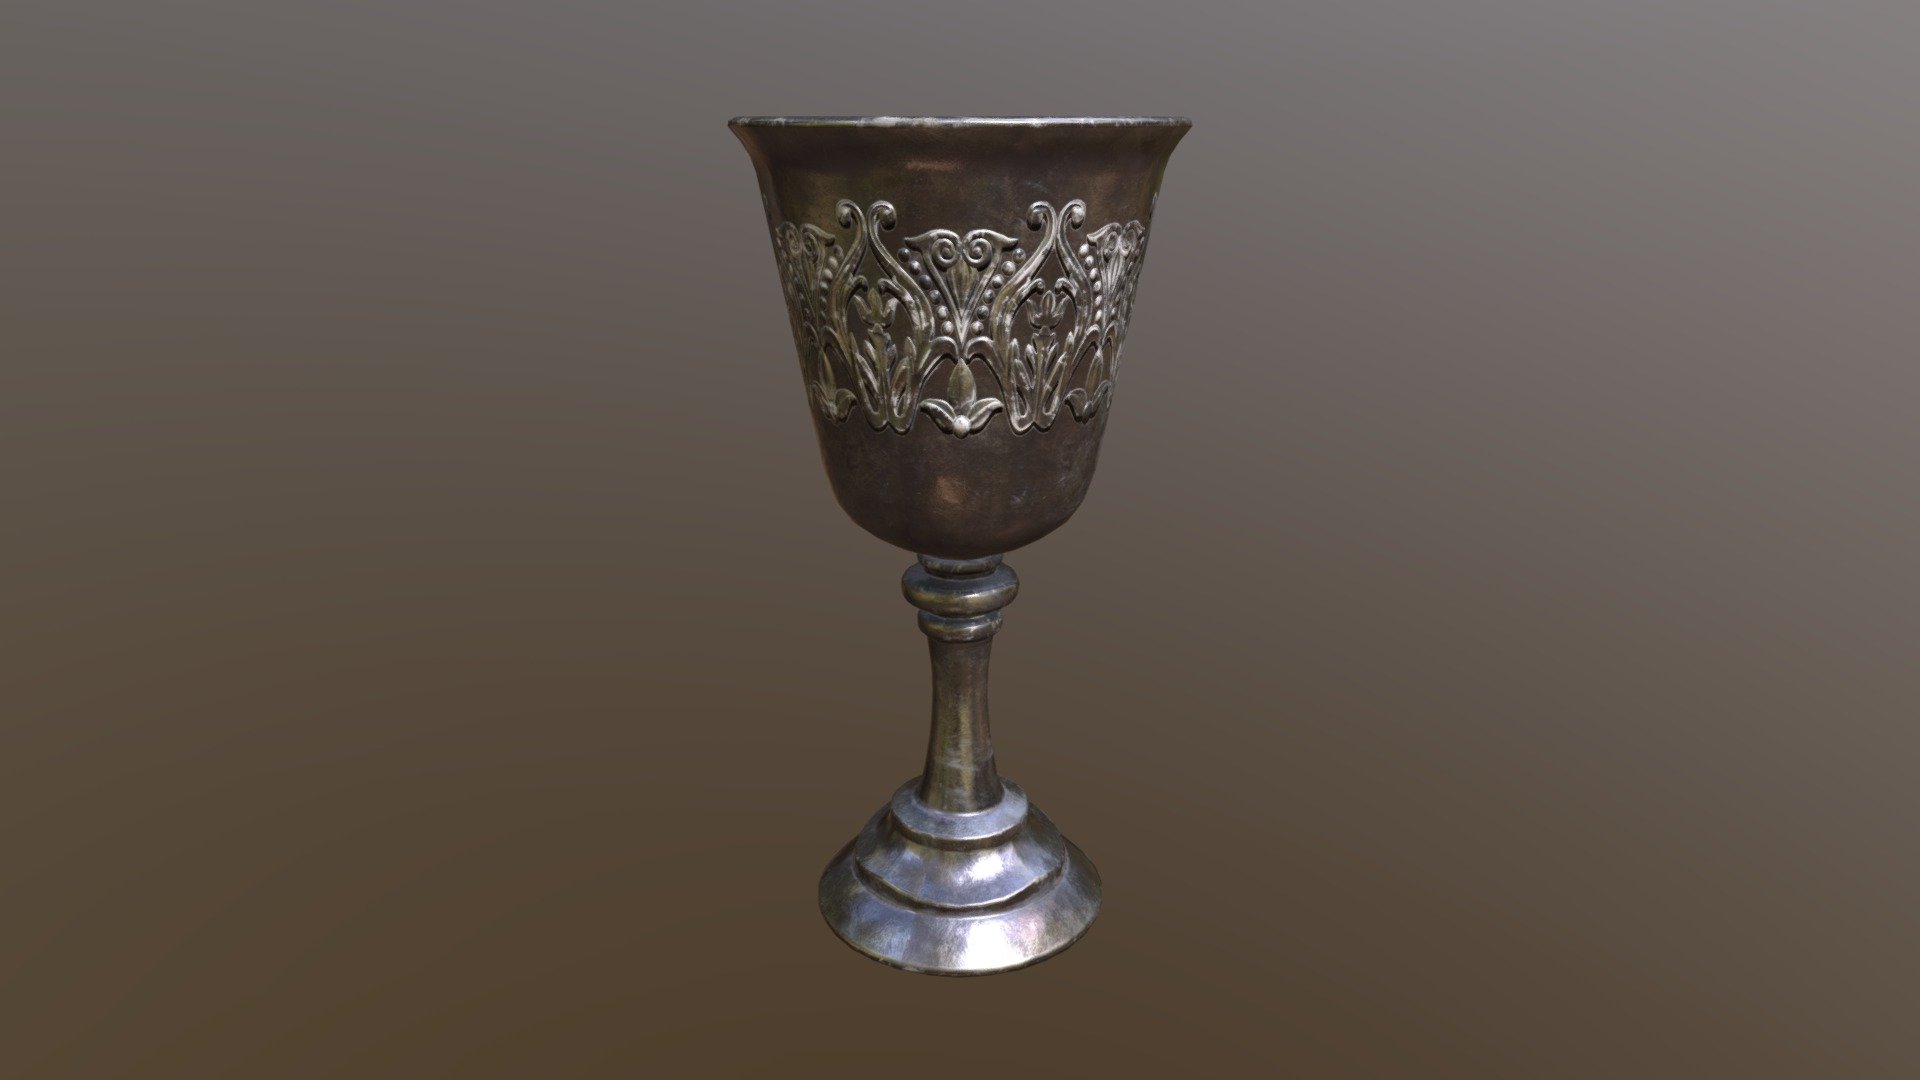 Royal Noble Chalice 3D Model. This model contains the Royal Noble Chalice itself 

All modeled in Maya, textured with Substance Painter.

The model was built to scale and is UV unwrapped properly. Contains only one 4K texture set.  

⦁   5248 tris. 

⦁   Contains: .FBX .OBJ and .DAE

⦁   Model has clean topology. No Ngons.

⦁   Built to scale

⦁   Unwrapped UV Map

⦁   4K Texture set

⦁   High quality details

⦁   Based on real life references

⦁   Renders done in Marmoset Toolbag

Polycount: 

Verts 2626

Edges 5288

Faces 2664

Tris 5248

If you have any questions please feel free to ask me 3d model